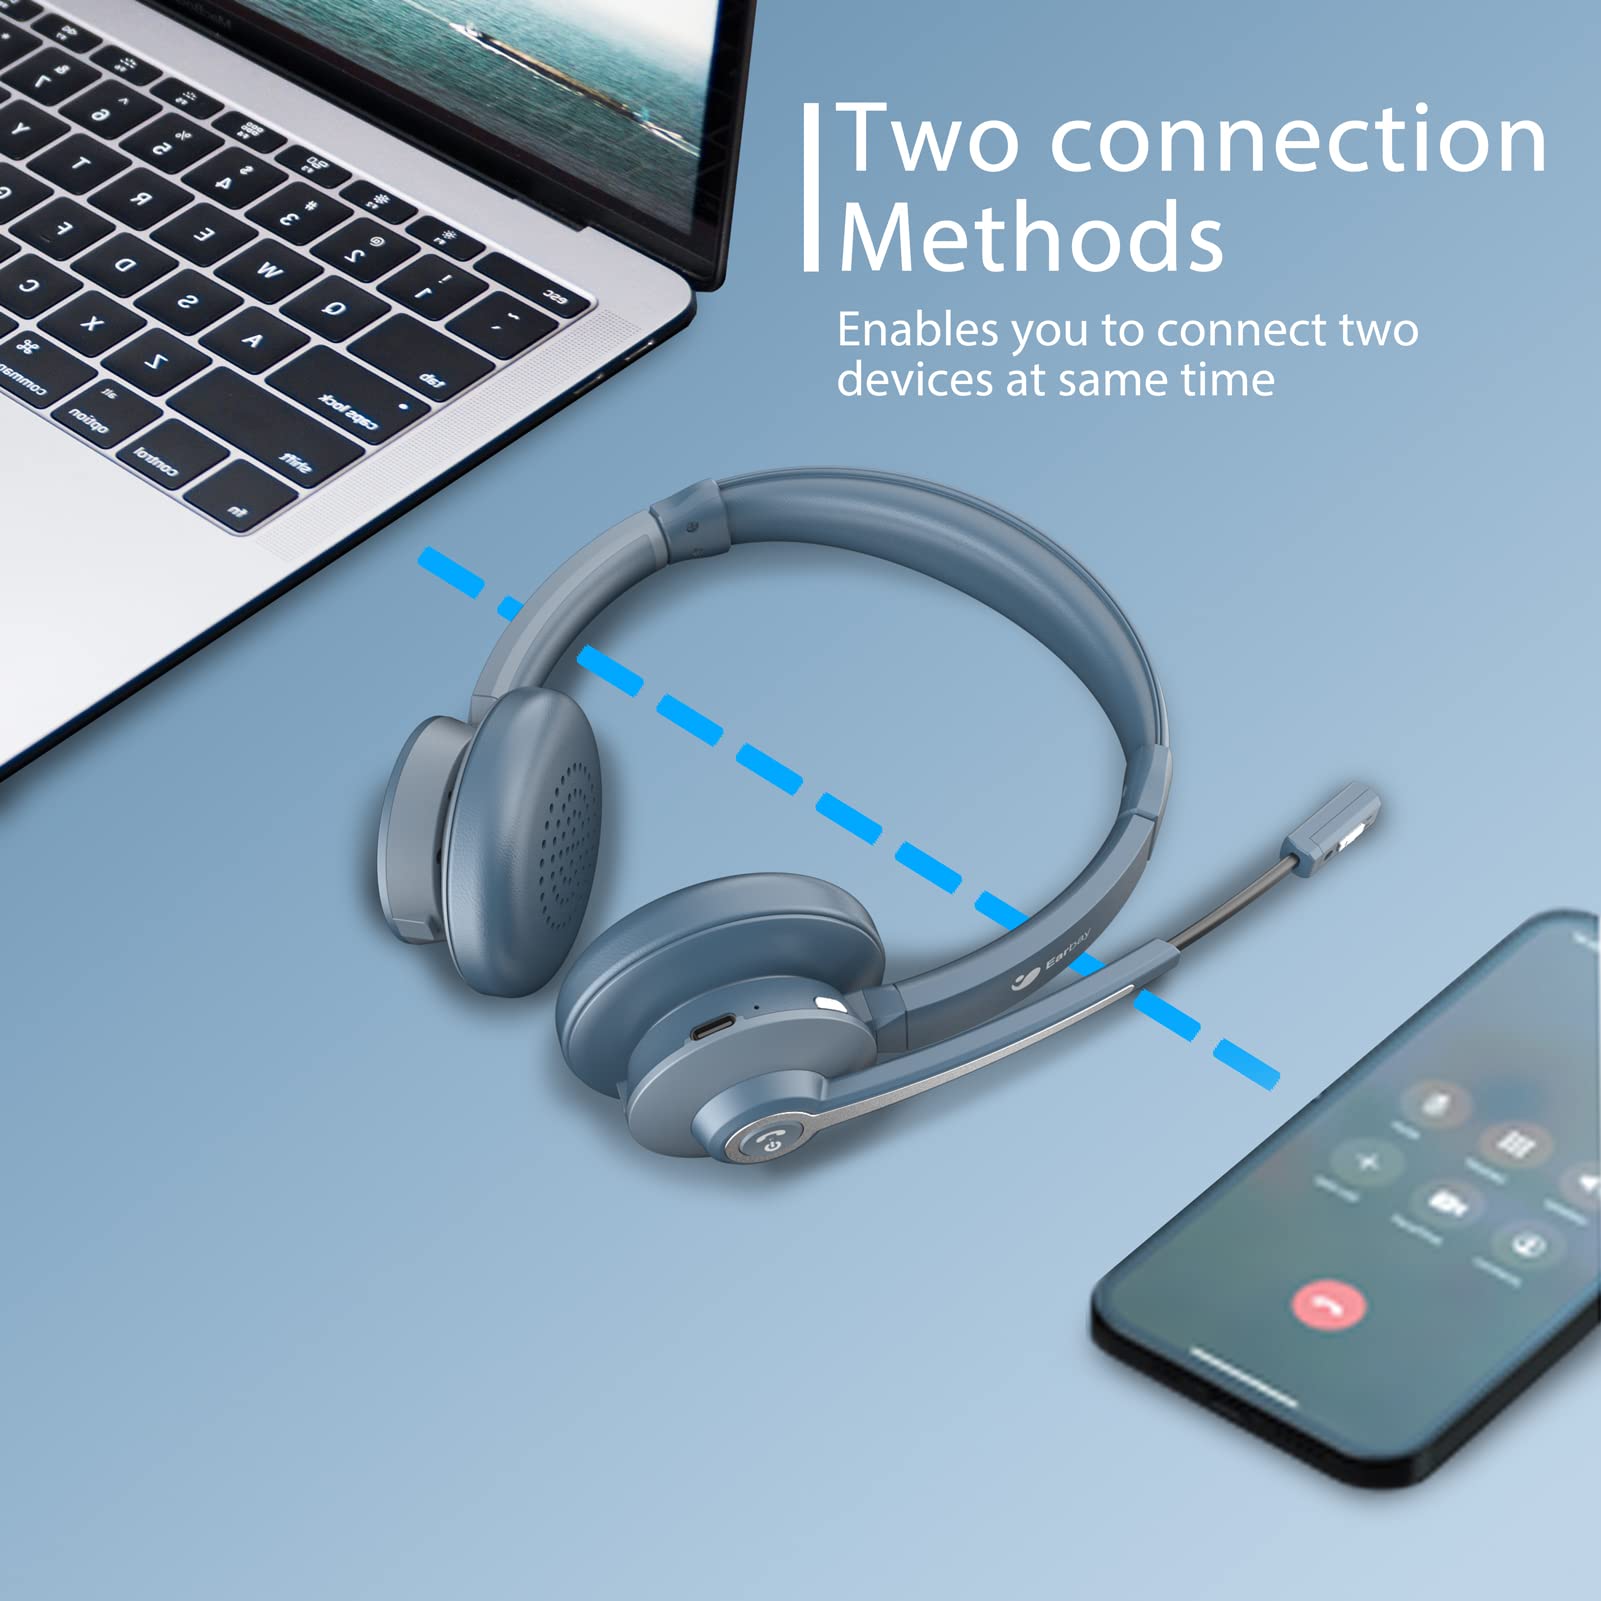 Two connection methods,Enables you to connect two devices at same time.